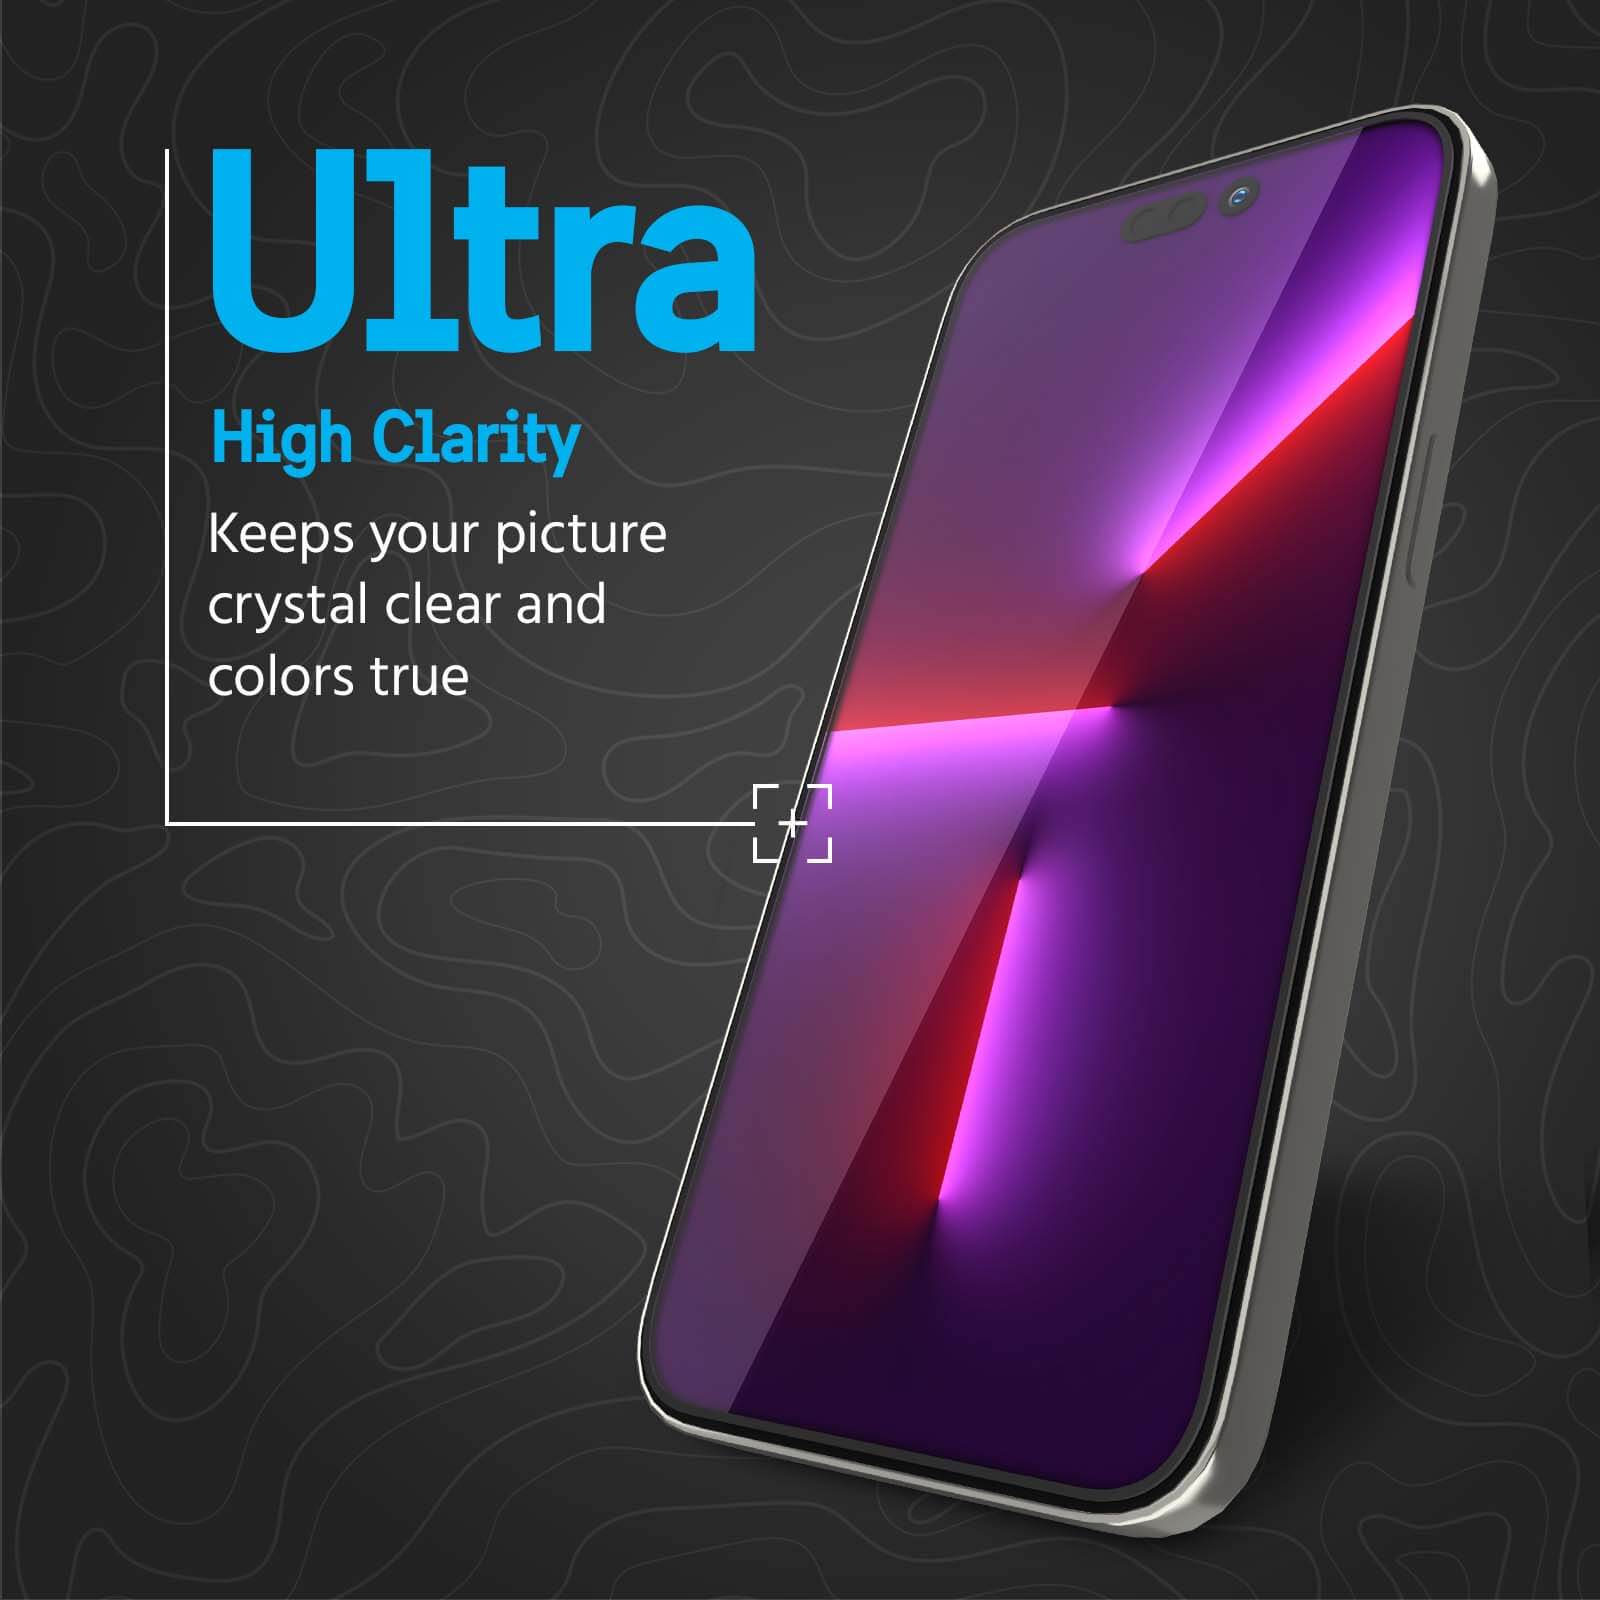 Ultra high clarity keeps your picture crystal clear and colors true. color::clear